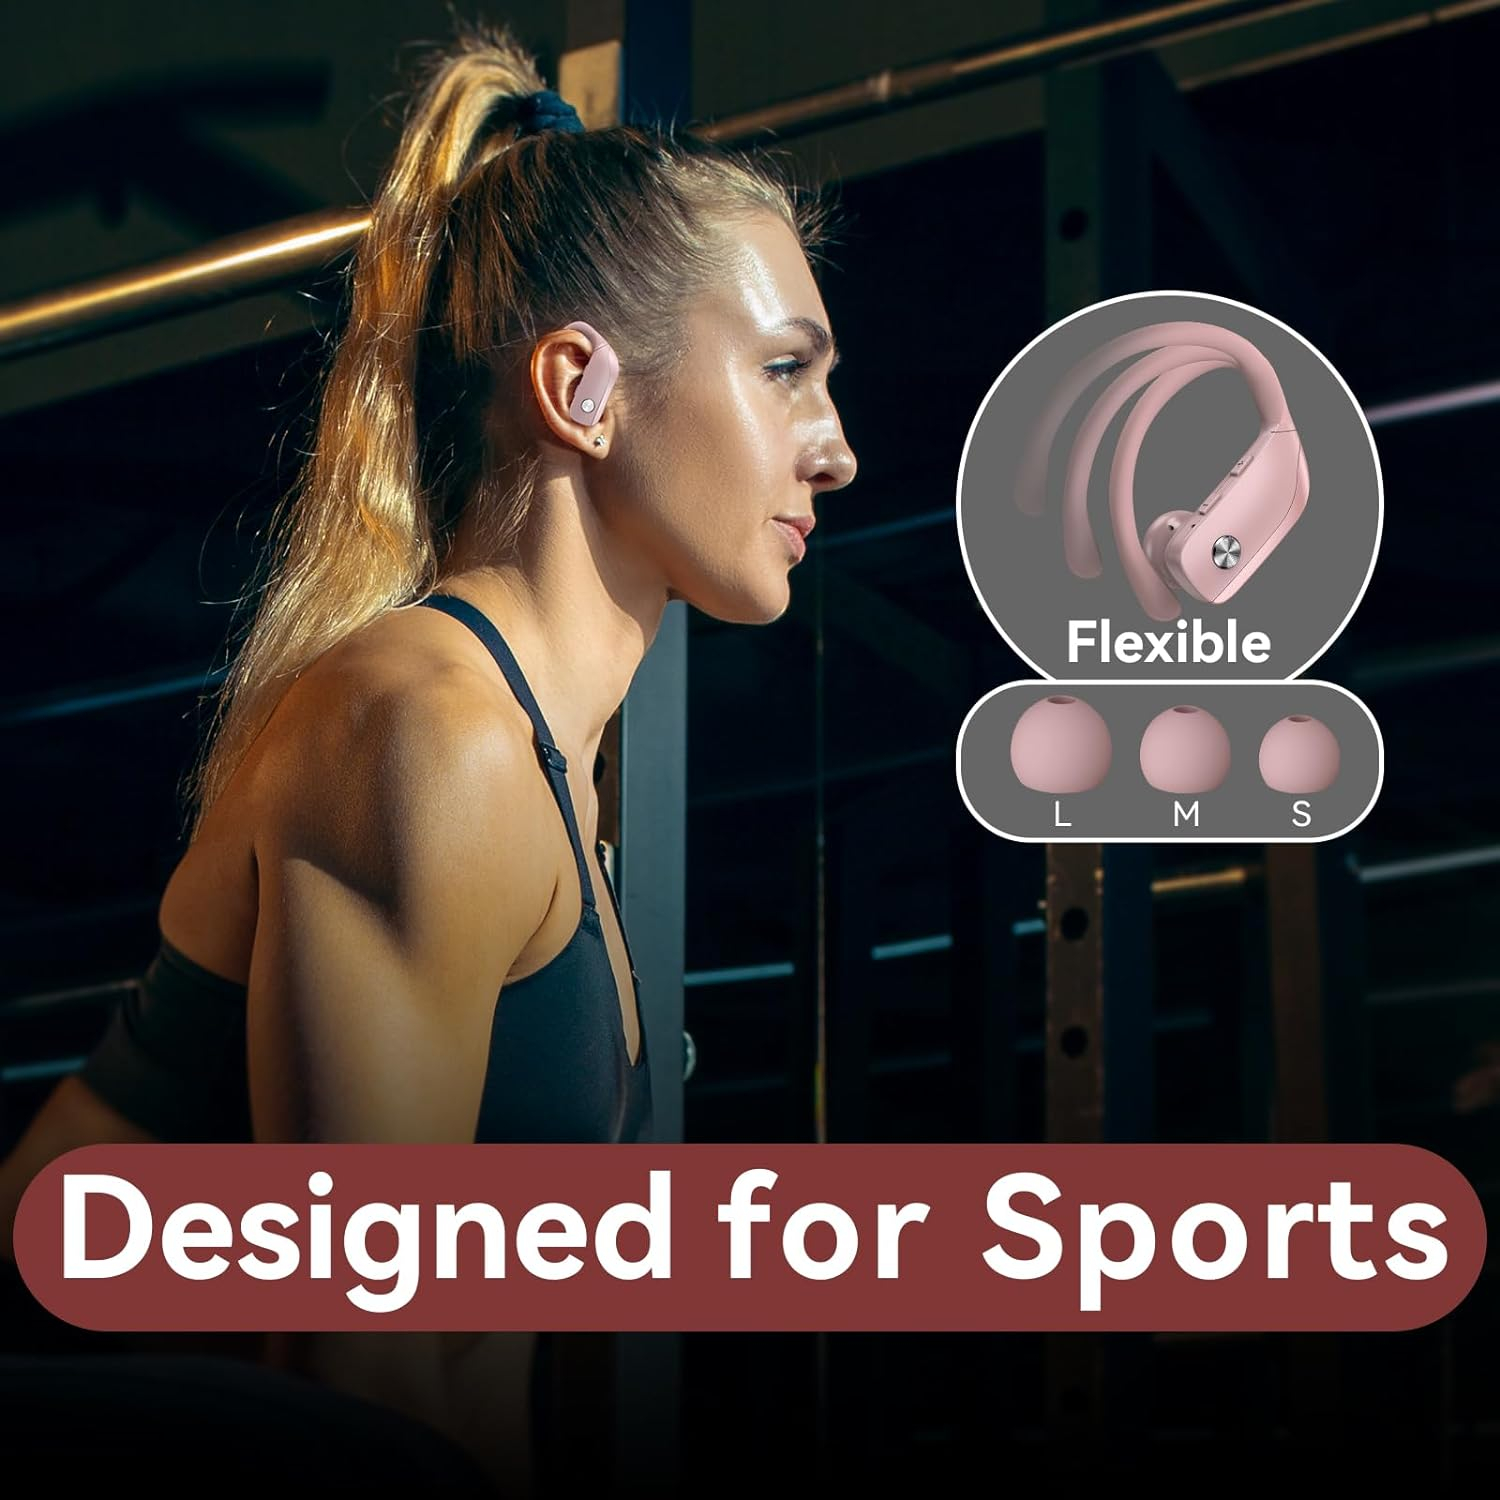 bmani Wireless Earbuds Bluetooth Headphones 48hrs Play Back Sport Earphones with LED Display Over-Ear Buds with Earhooks Built-in Mic Headset for Workout Pink